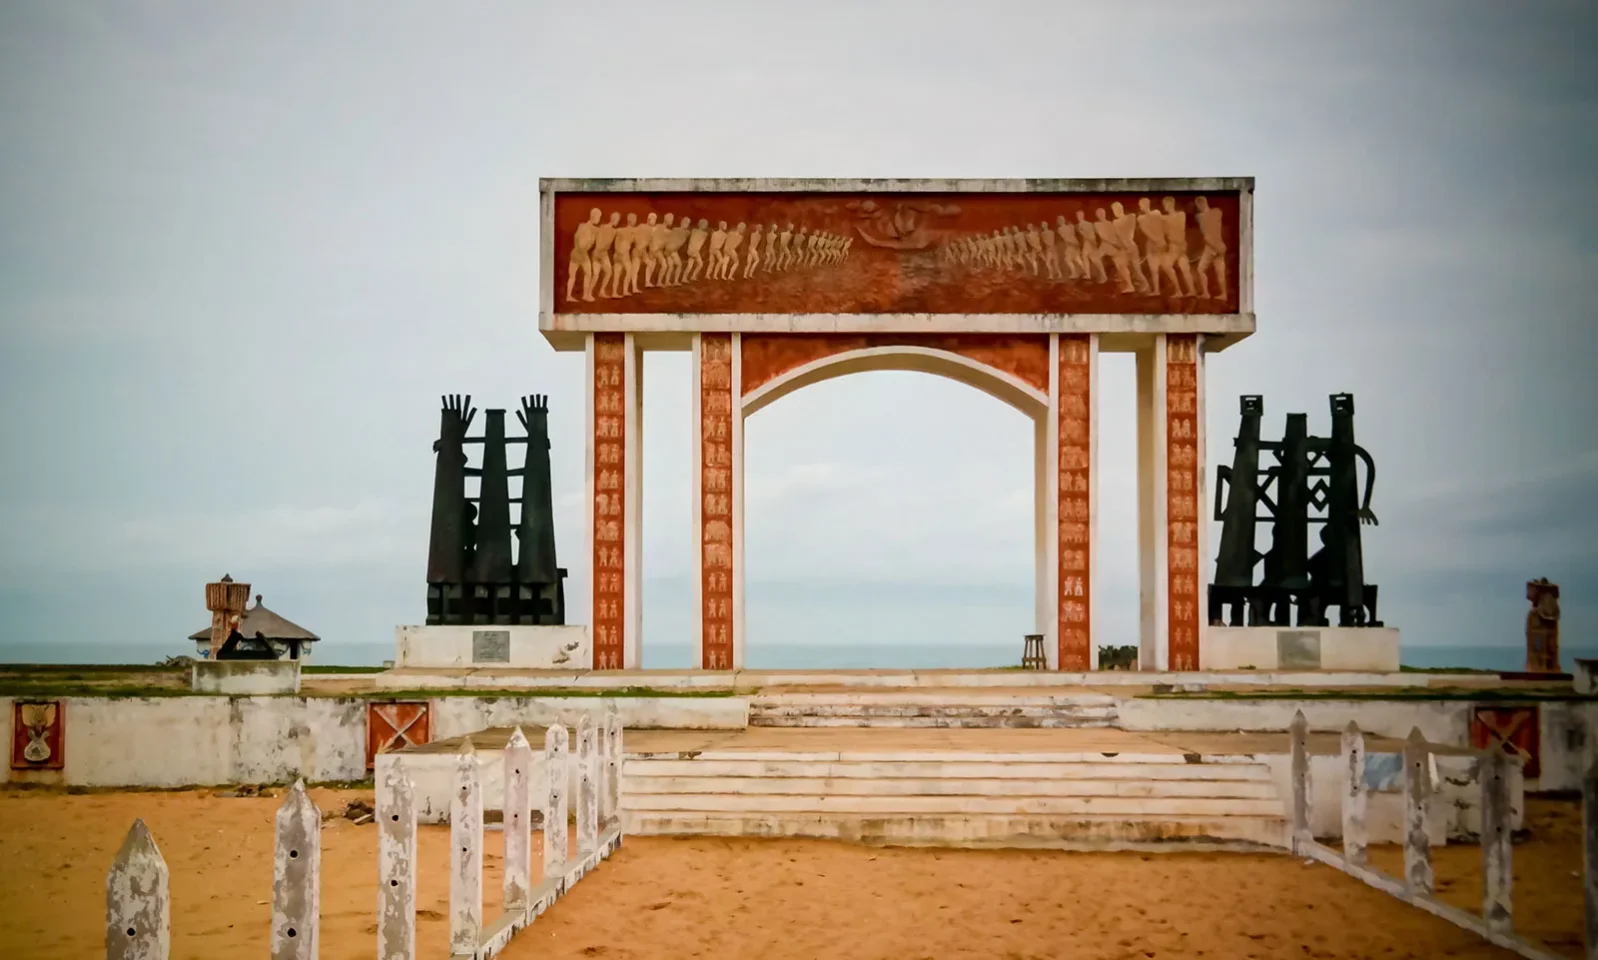 Gate of No Return, a monument commemorating the lives of those captured and traded as slaves, on the beach of Ouidah, 🏛️ #Benin. Photo Credit: Homocosmicos